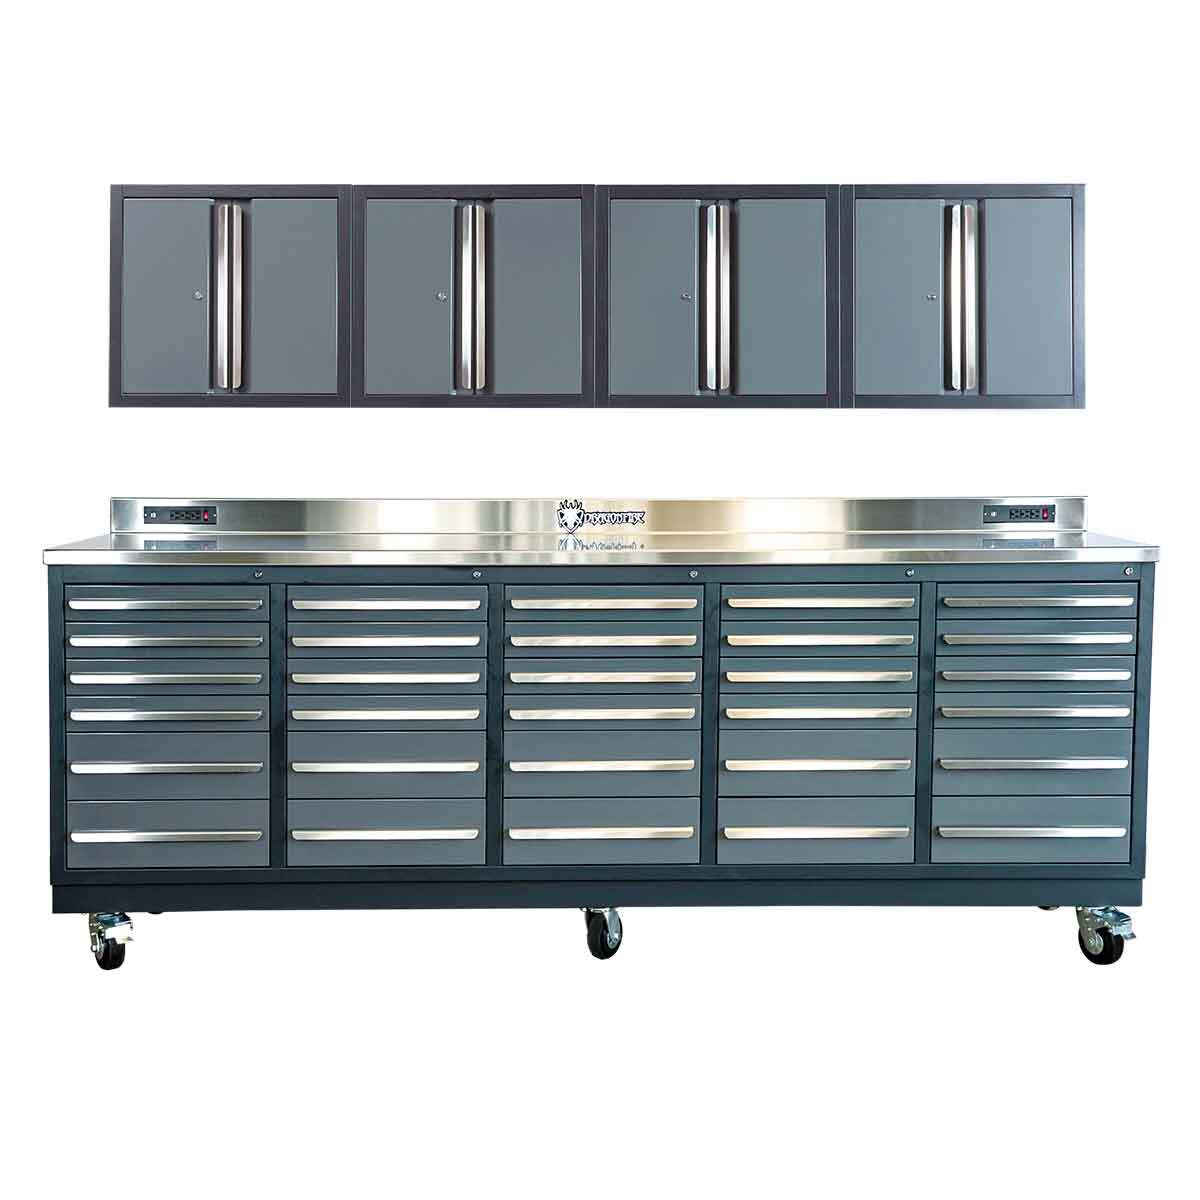 https://dragonfiretools.com/wp-content/uploads/2022/06/30-Drawer-with-Wall-Cabinets.jpg